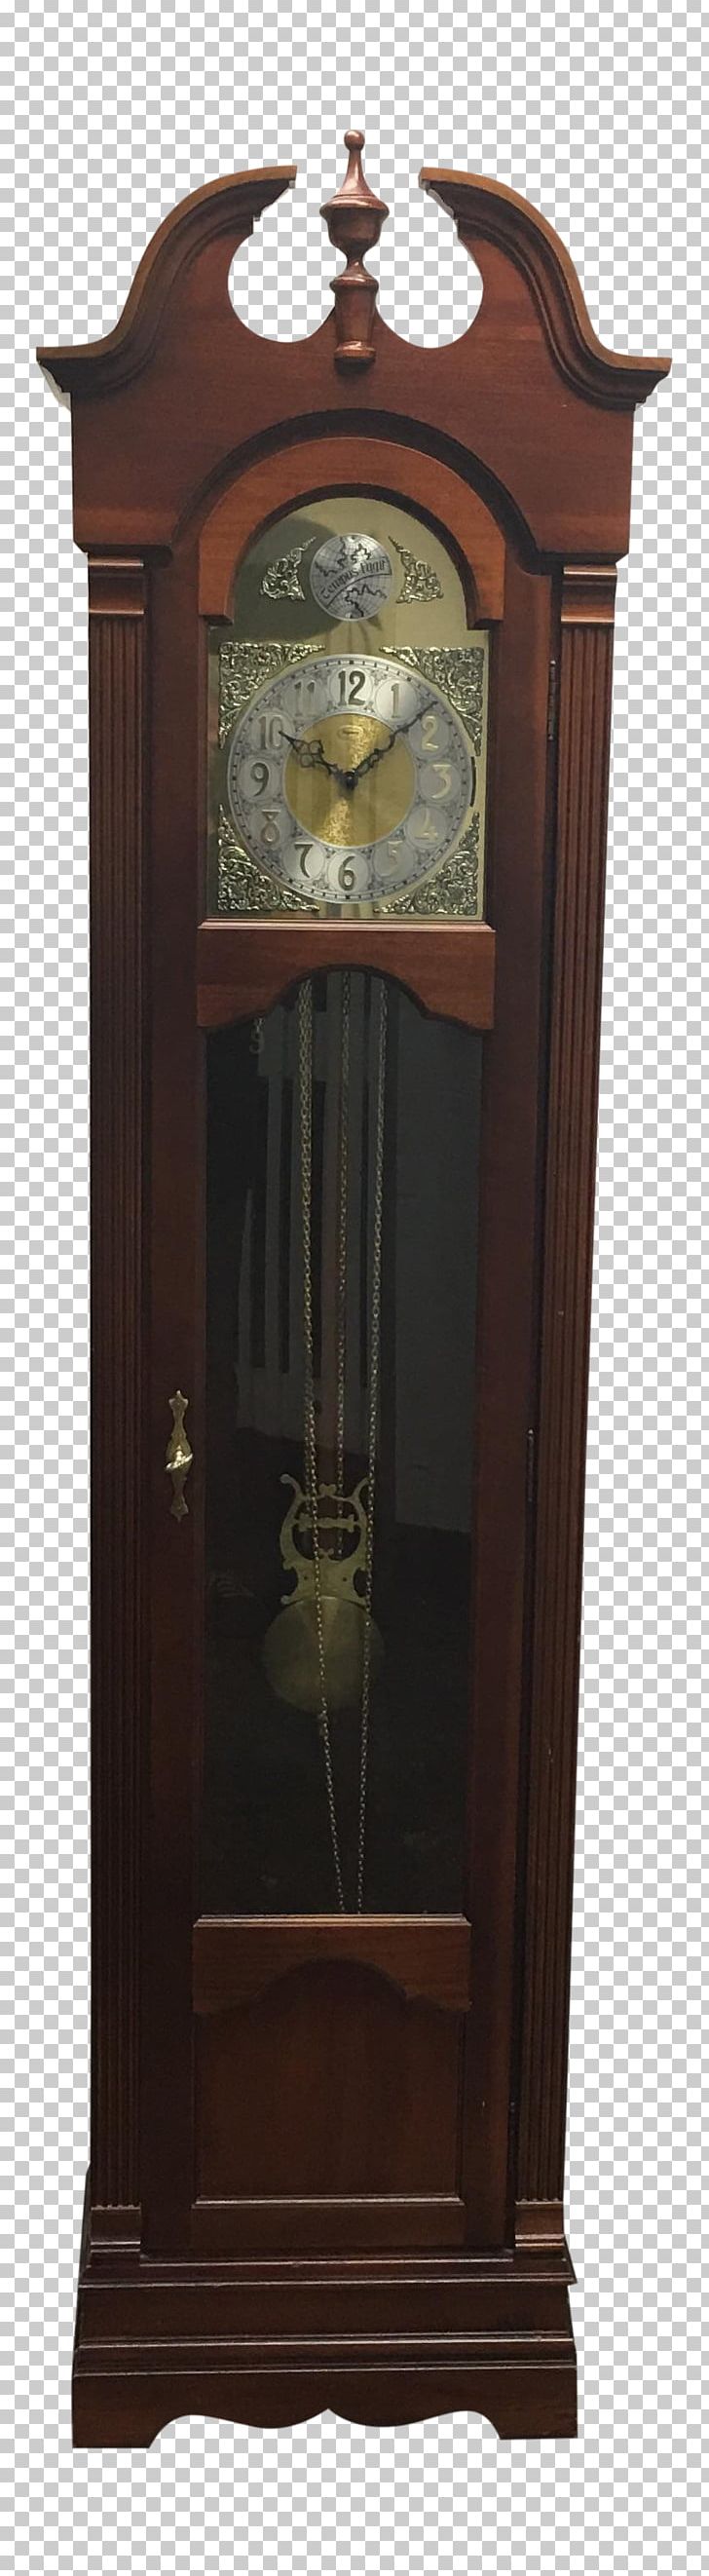 Design Plus Consignment Gallery Floor & Grandfather Clocks Furniture Howard Miller Clock Company PNG, Clipart, Antique, China Cabinet, Clock, Cupboard, Design Plus Consignment Gallery Free PNG Download